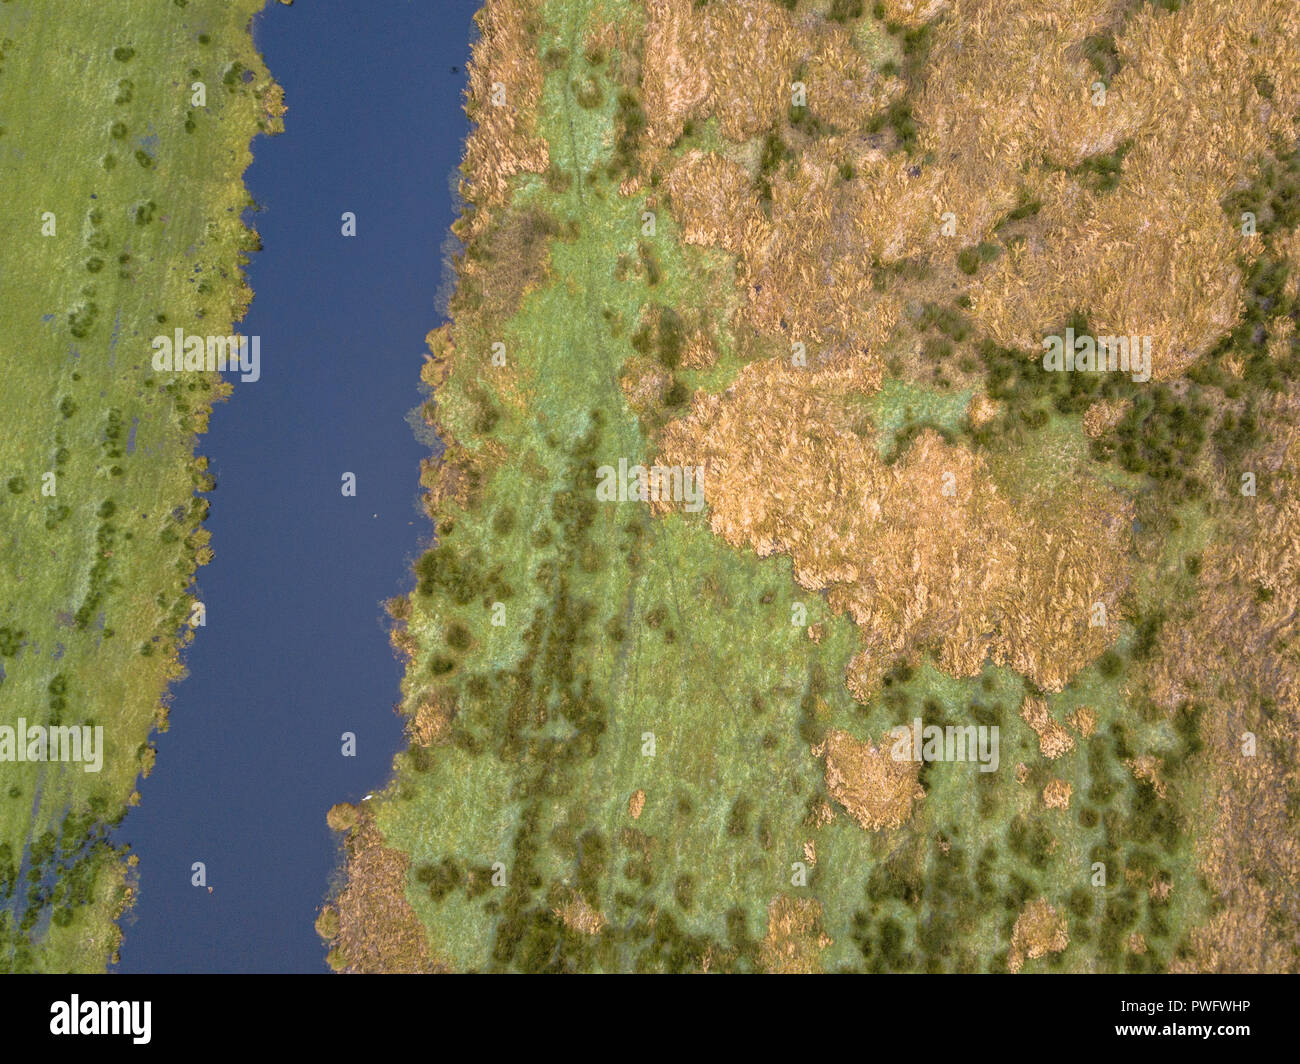 Aerial view of agricultural marshland with canal and wet grassland Stock Photo